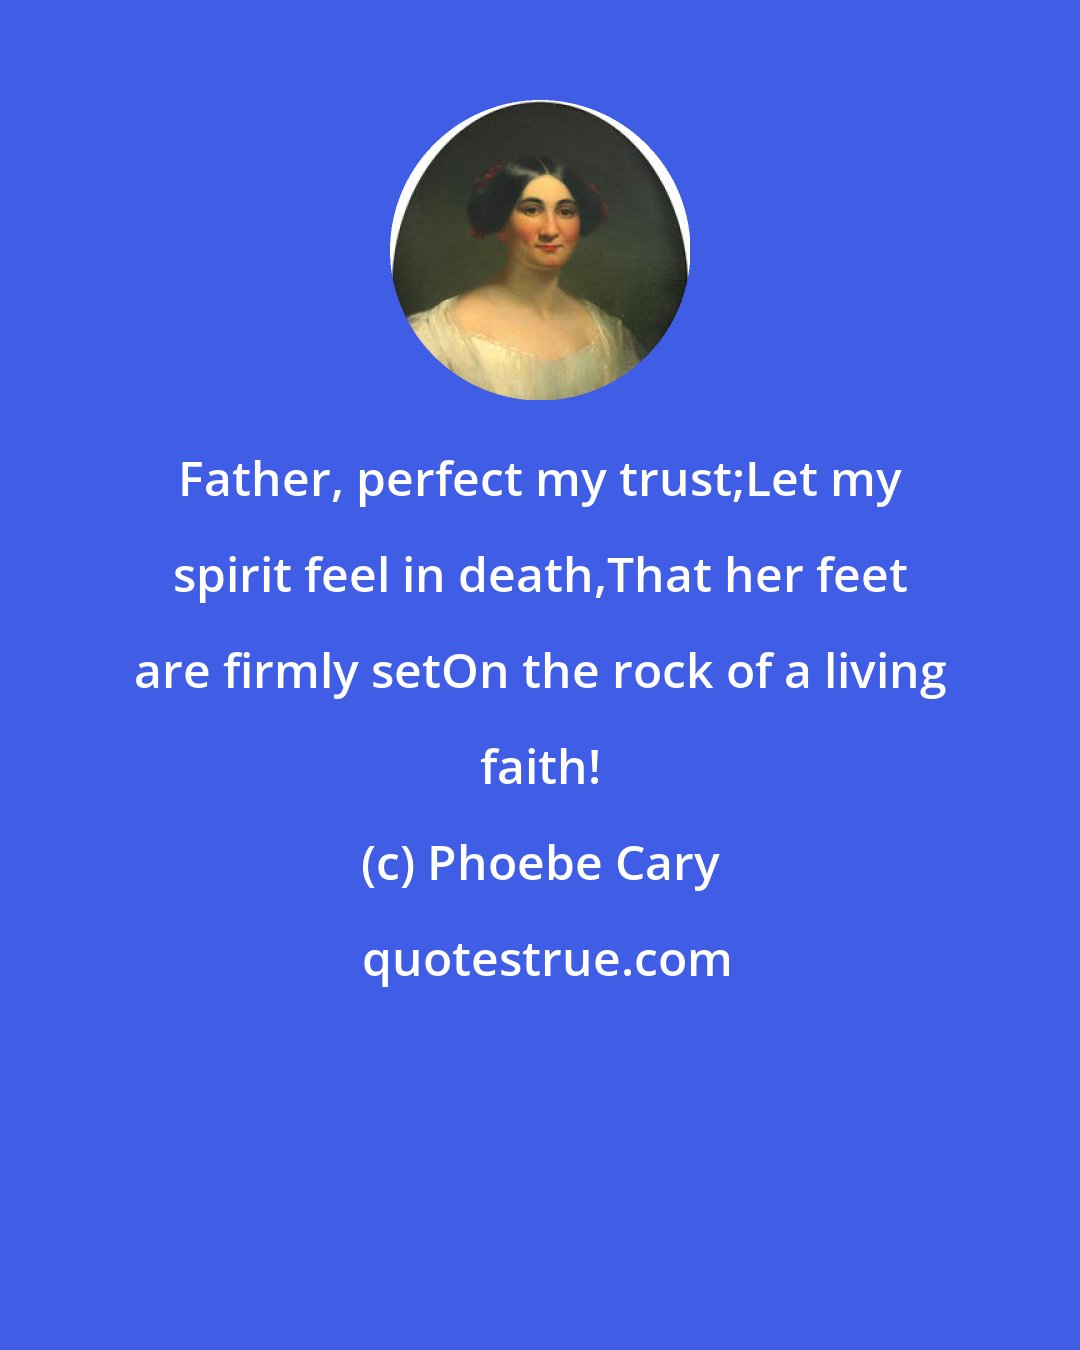 Phoebe Cary: Father, perfect my trust;Let my spirit feel in death,That her feet are firmly setOn the rock of a living faith!